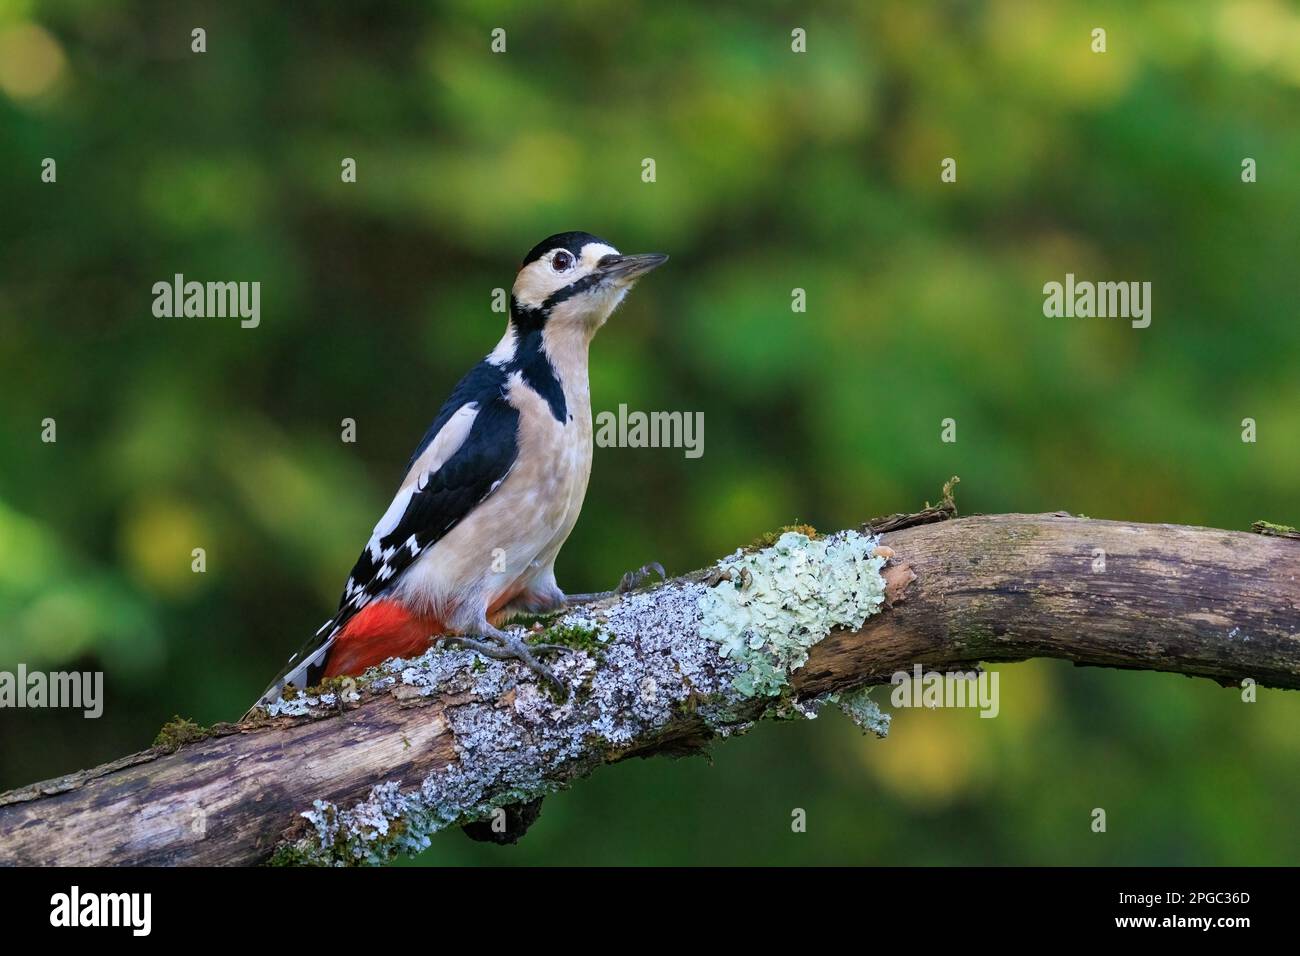 Great spotted woodpecker [ Dendrocopos major ] male bird on Lichen covered branch Stock Photo